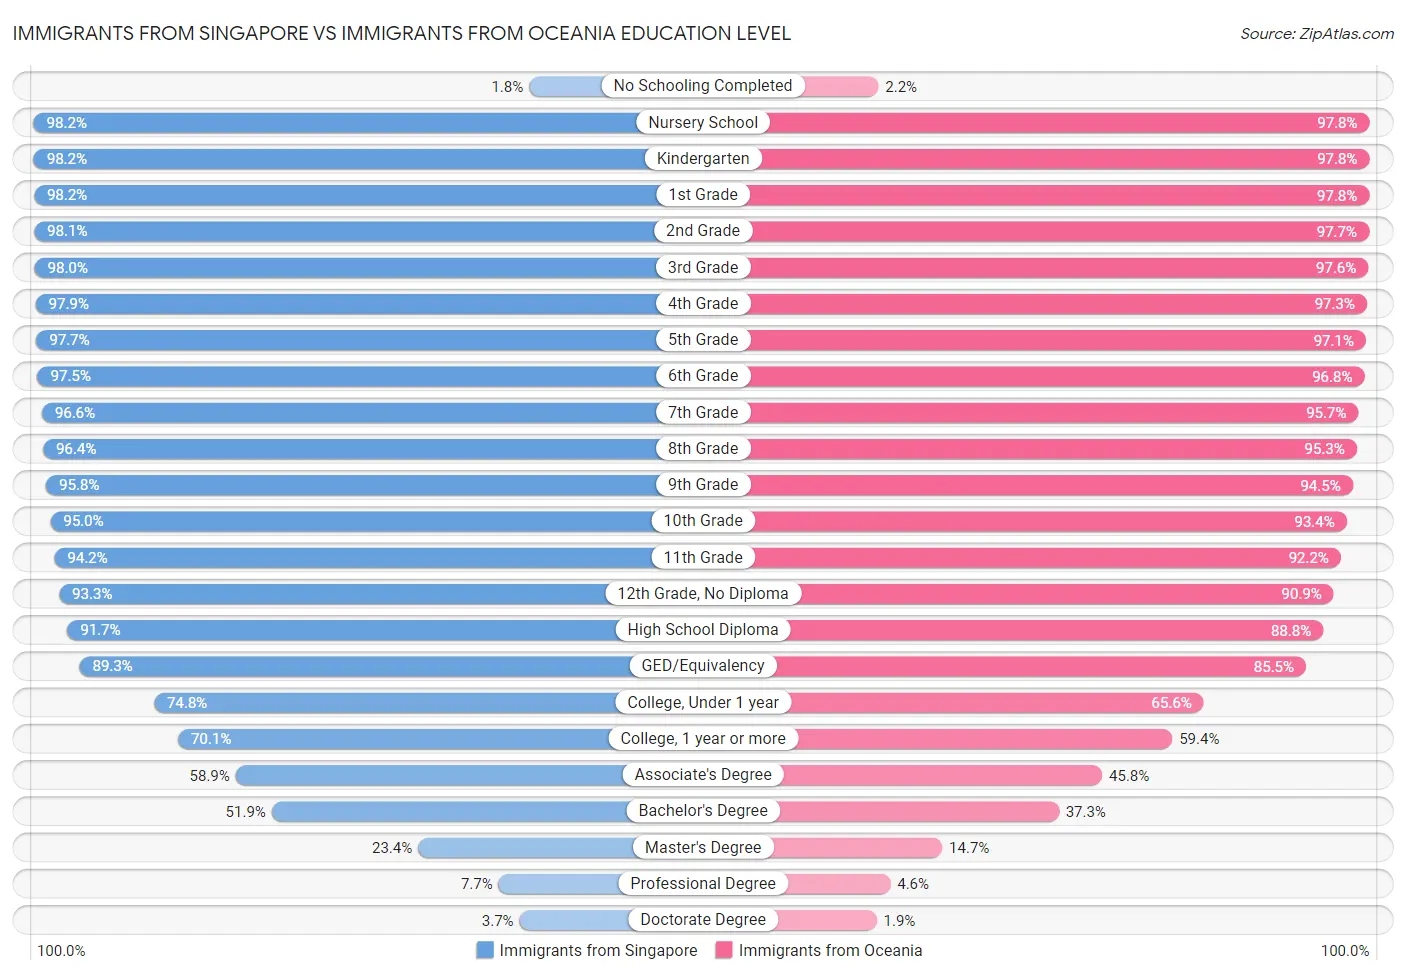 Immigrants from Singapore vs Immigrants from Oceania Education Level